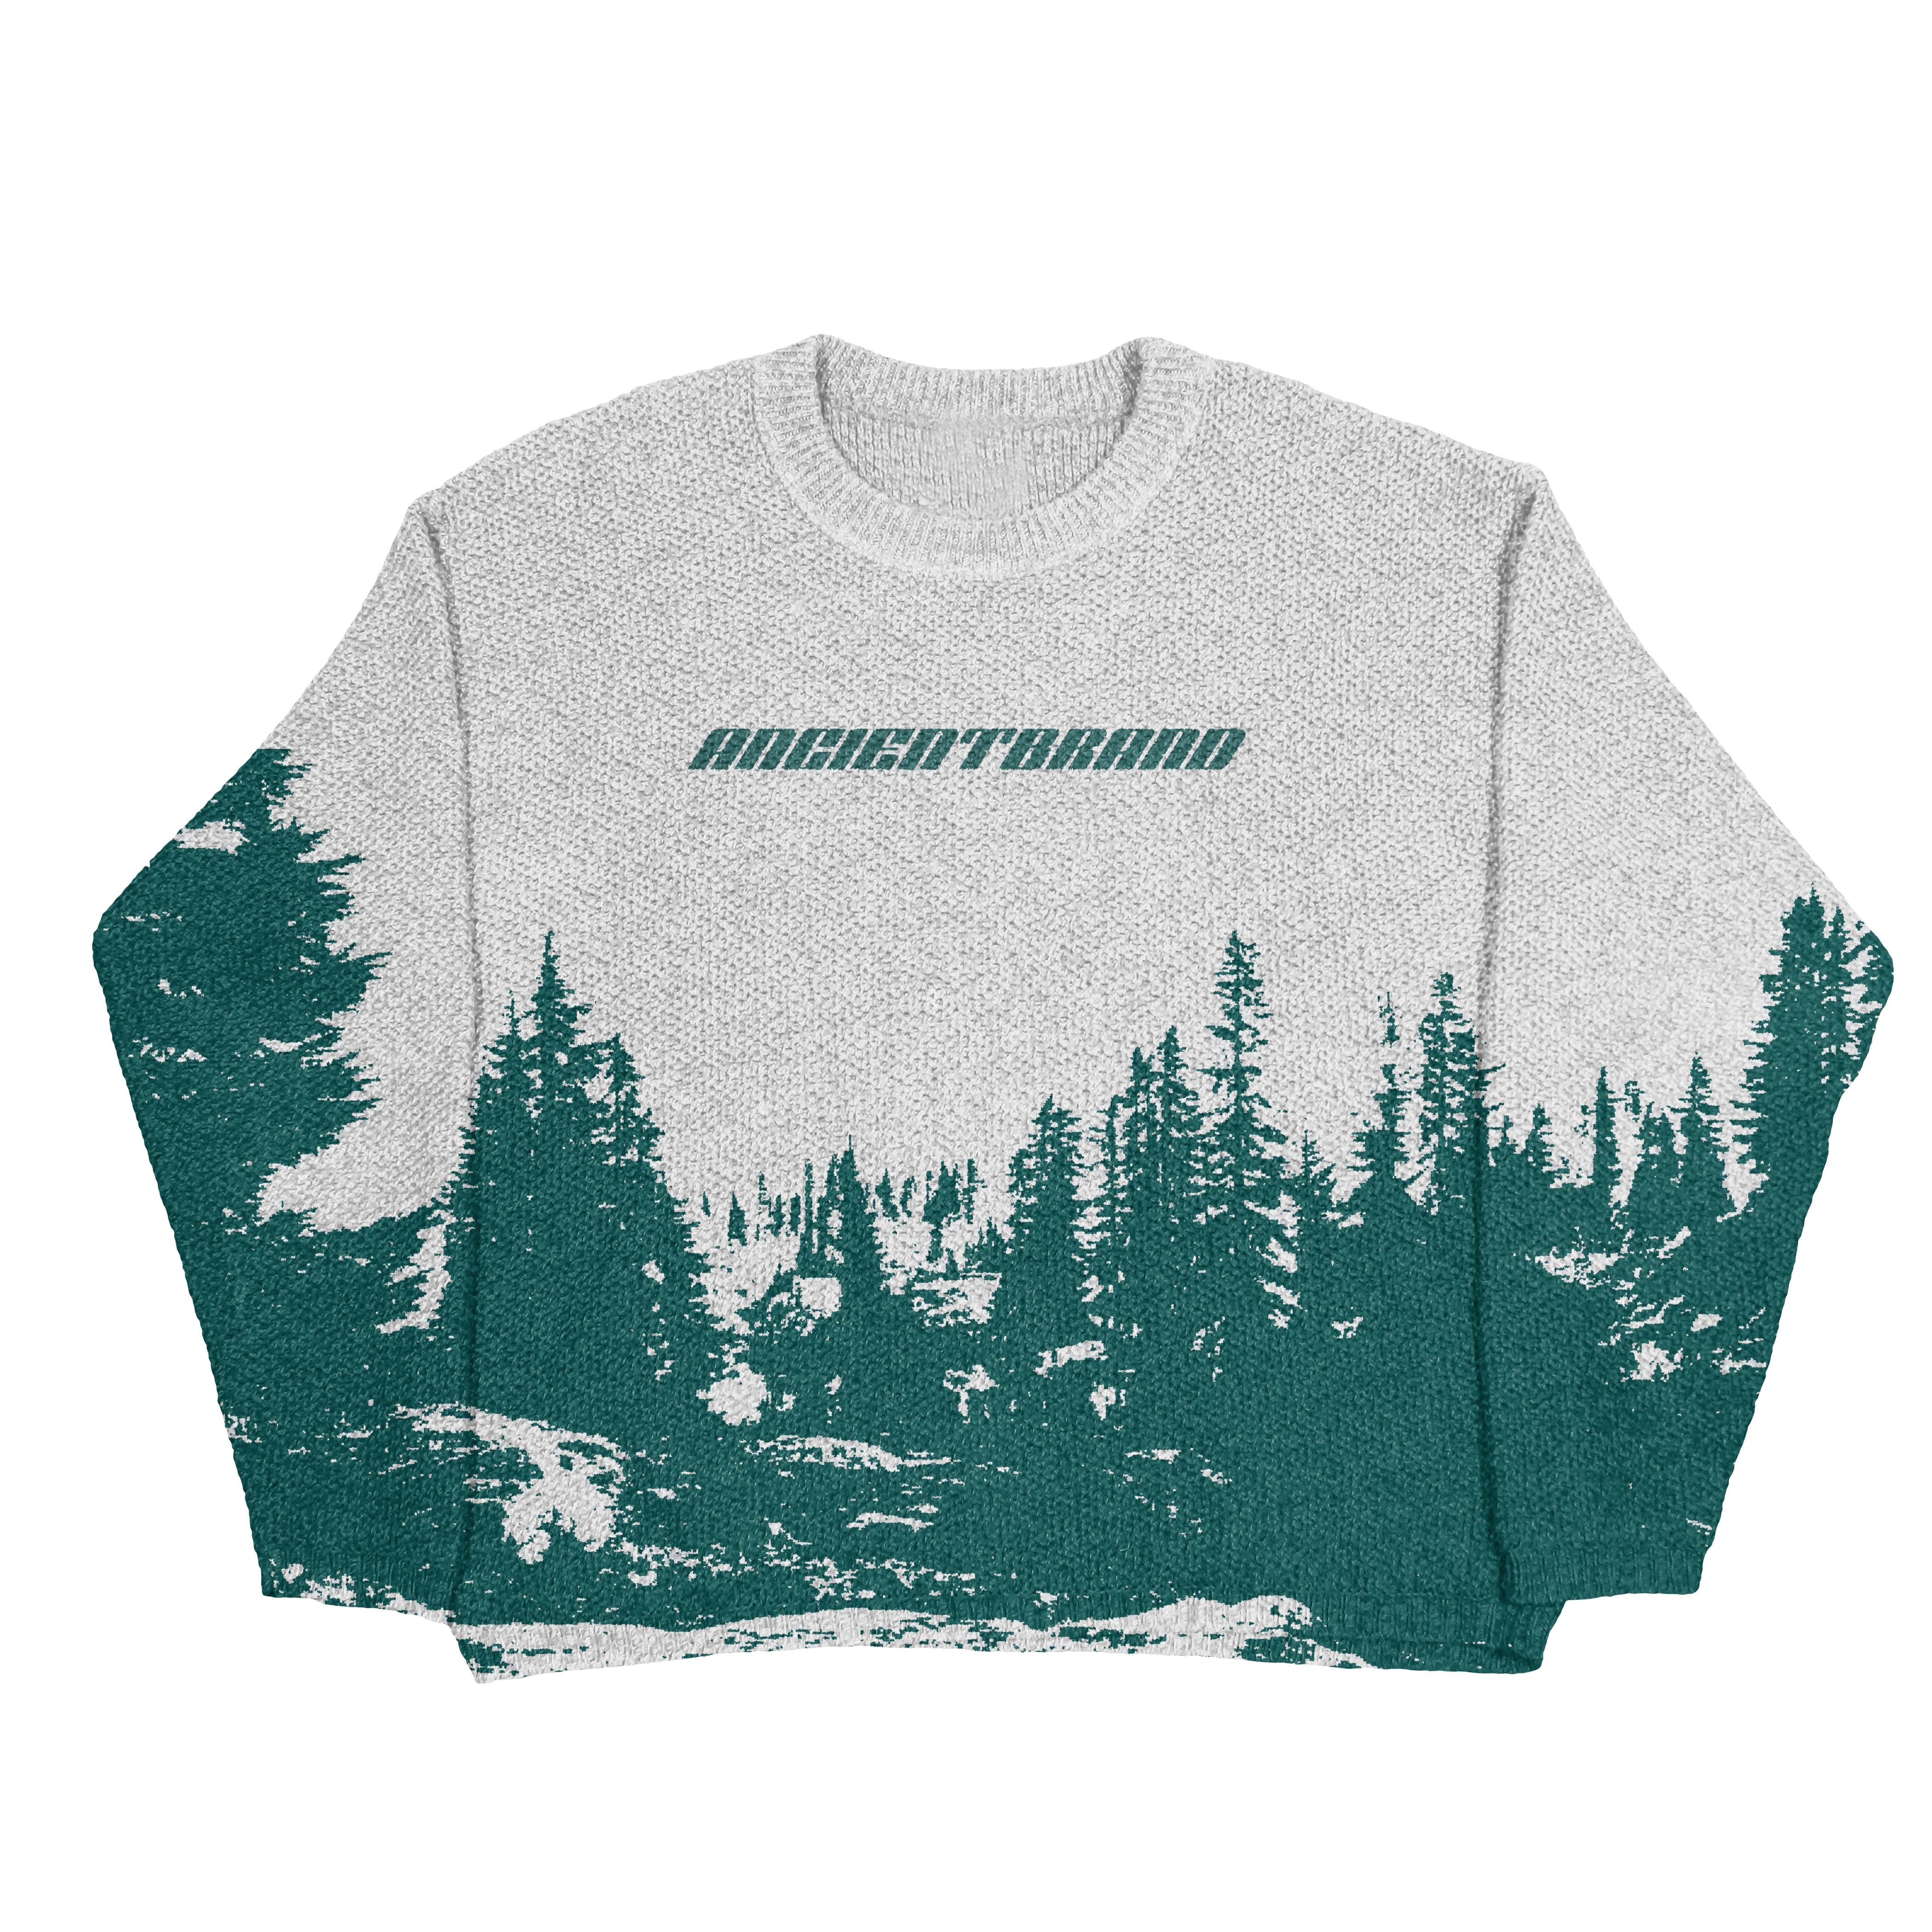 AncientBrand Keep Nature Wild Knit Sweater